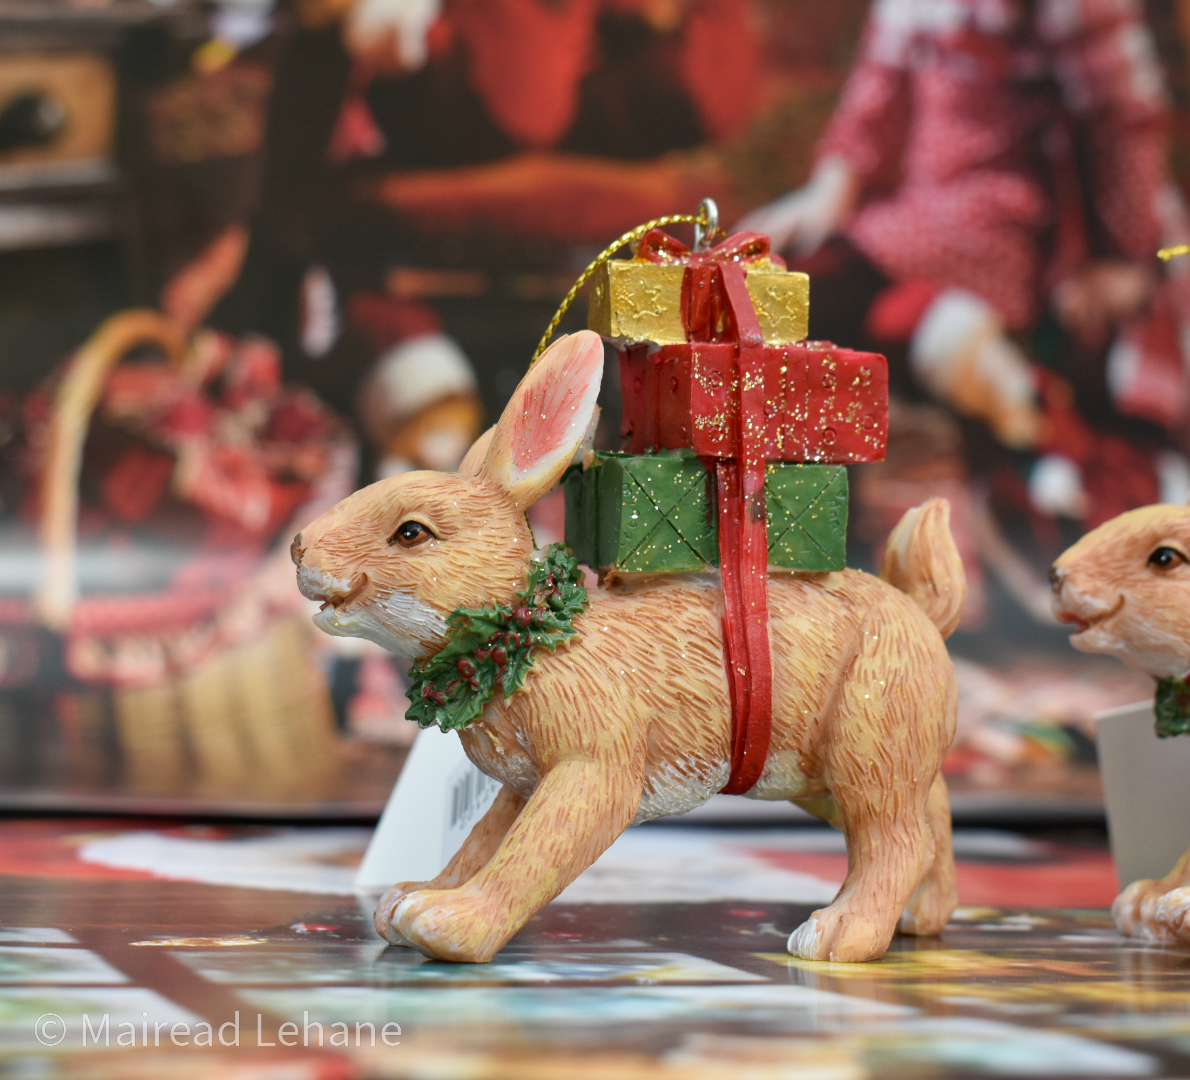 Rabbit Christmas decoration with 3 gifts tied to its back and a wreath around its neck